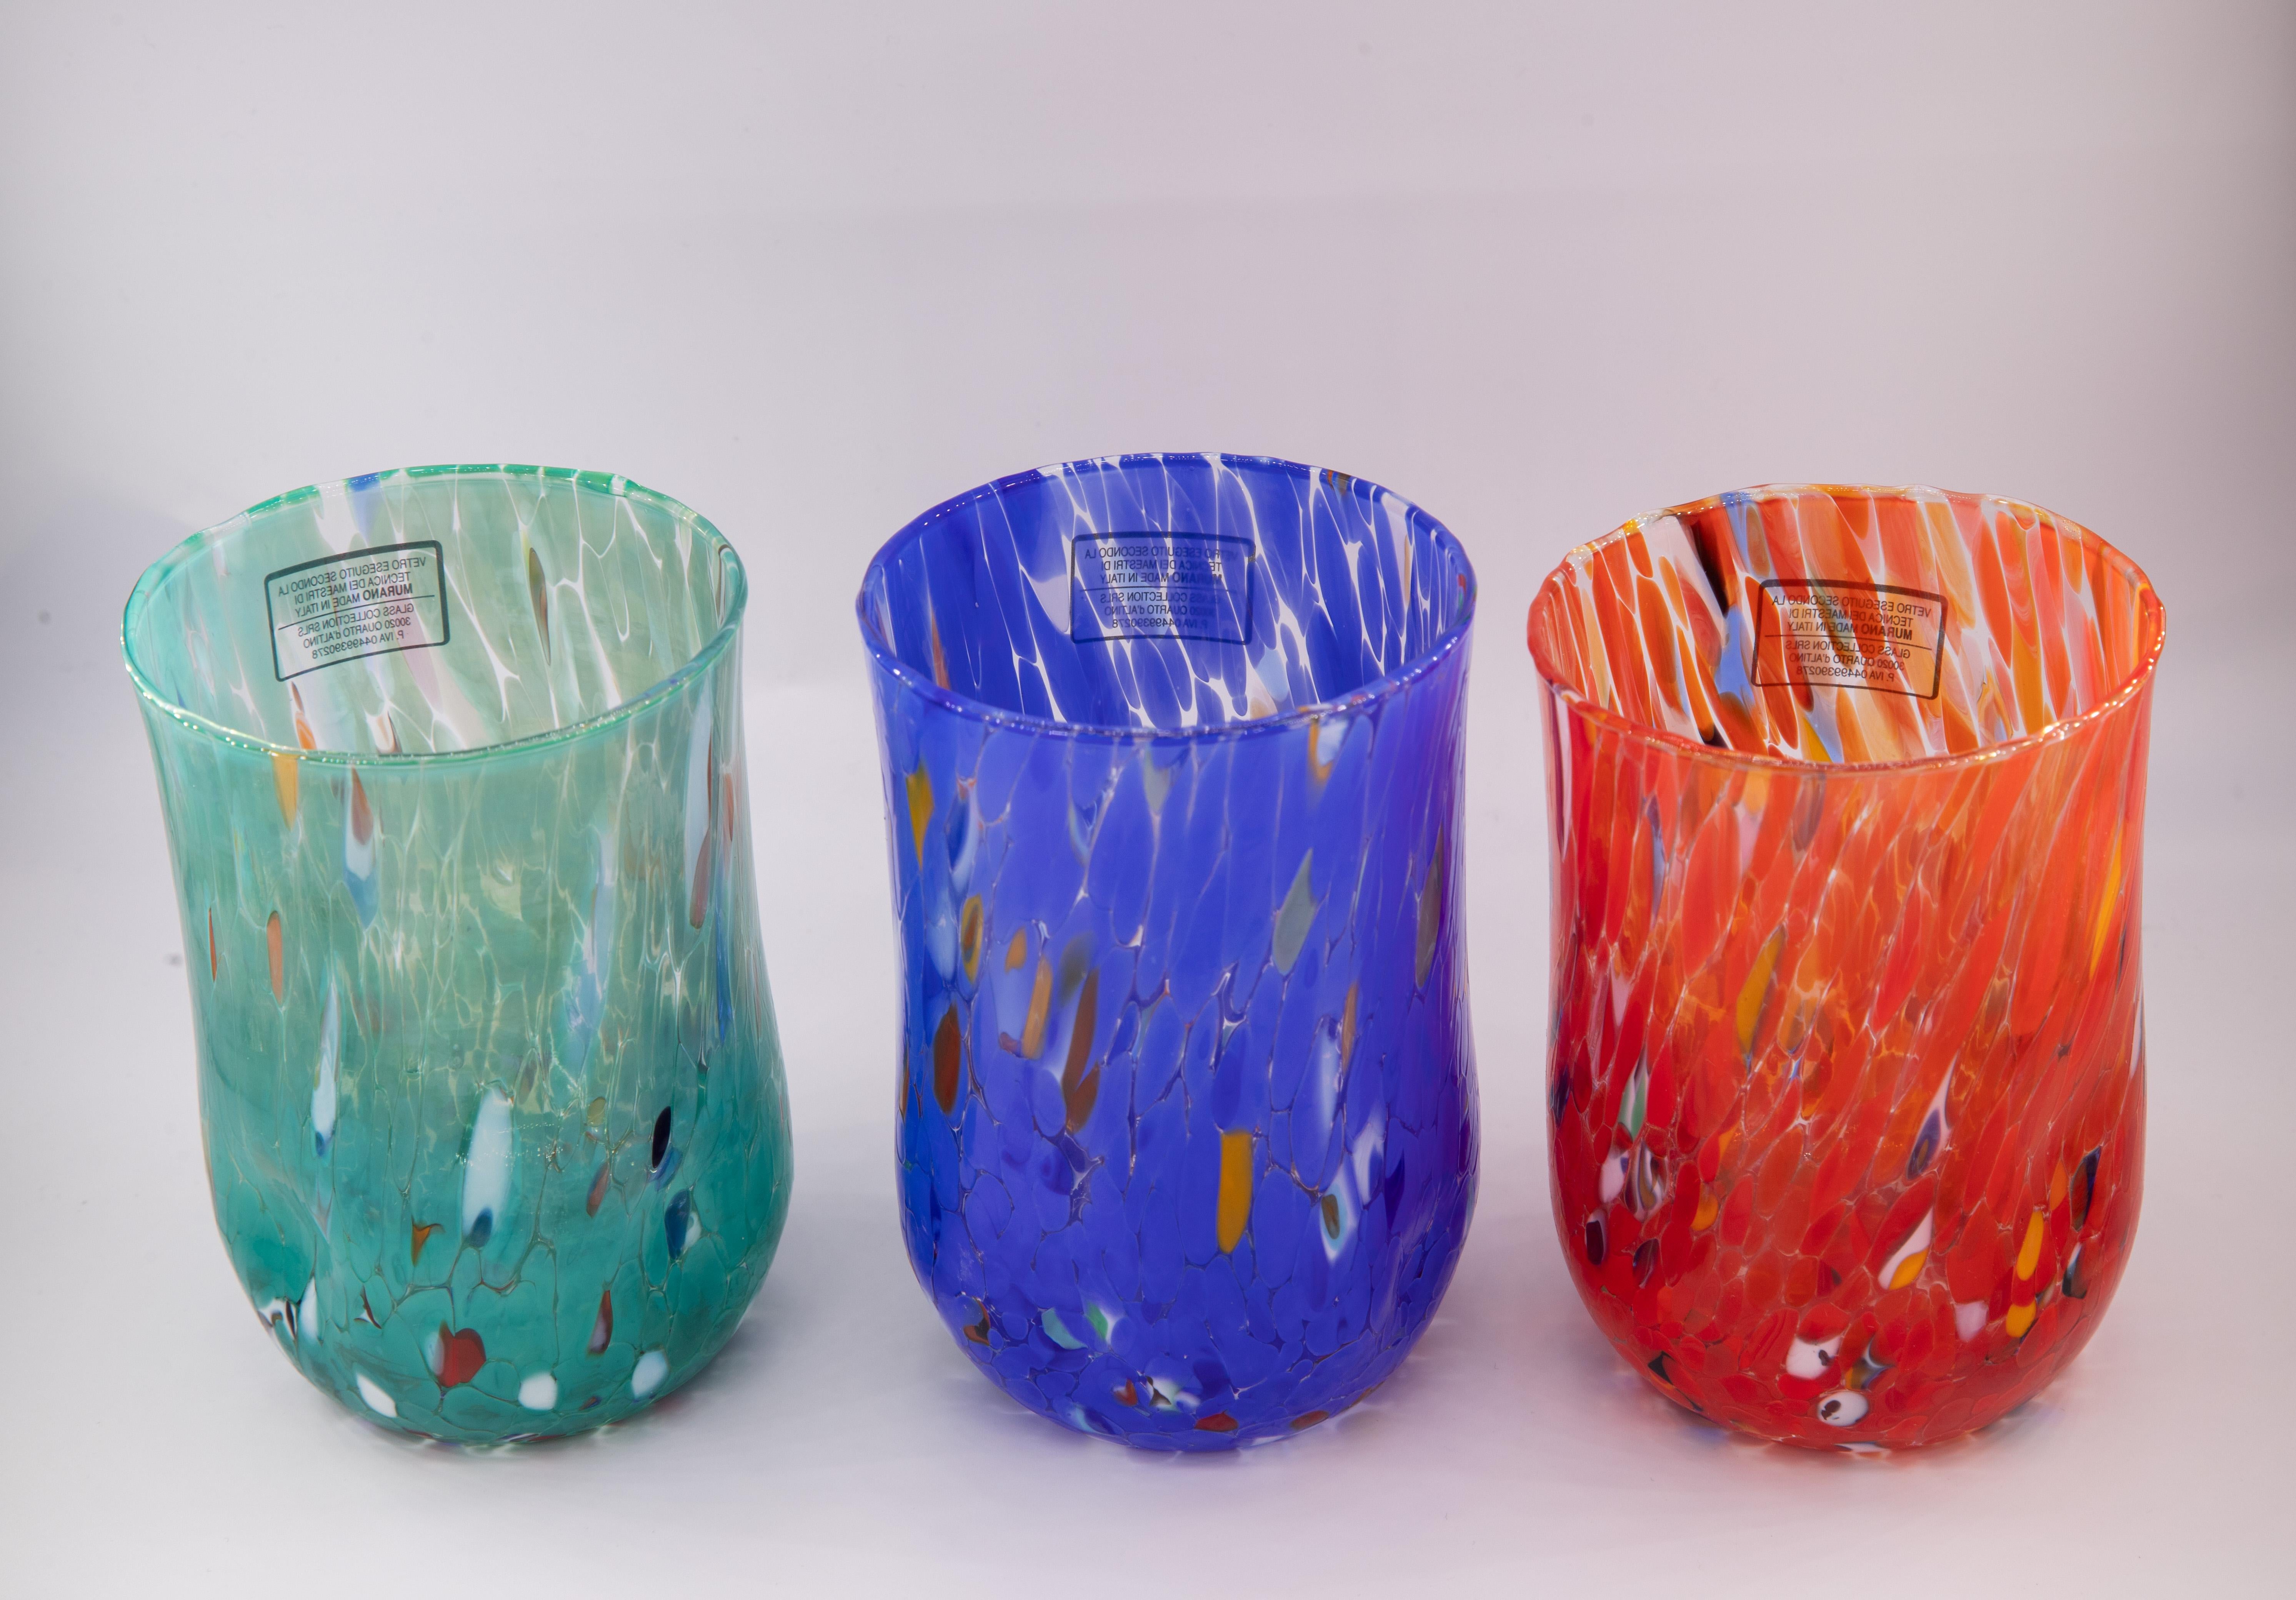 Set of six water\drink\wine glasses color Multicolor (petrol green, blue, red, ivory, periwinkle, mustard) - Murano glass - Made in Italy.

These individual Murano glasses are inspired by the classic 